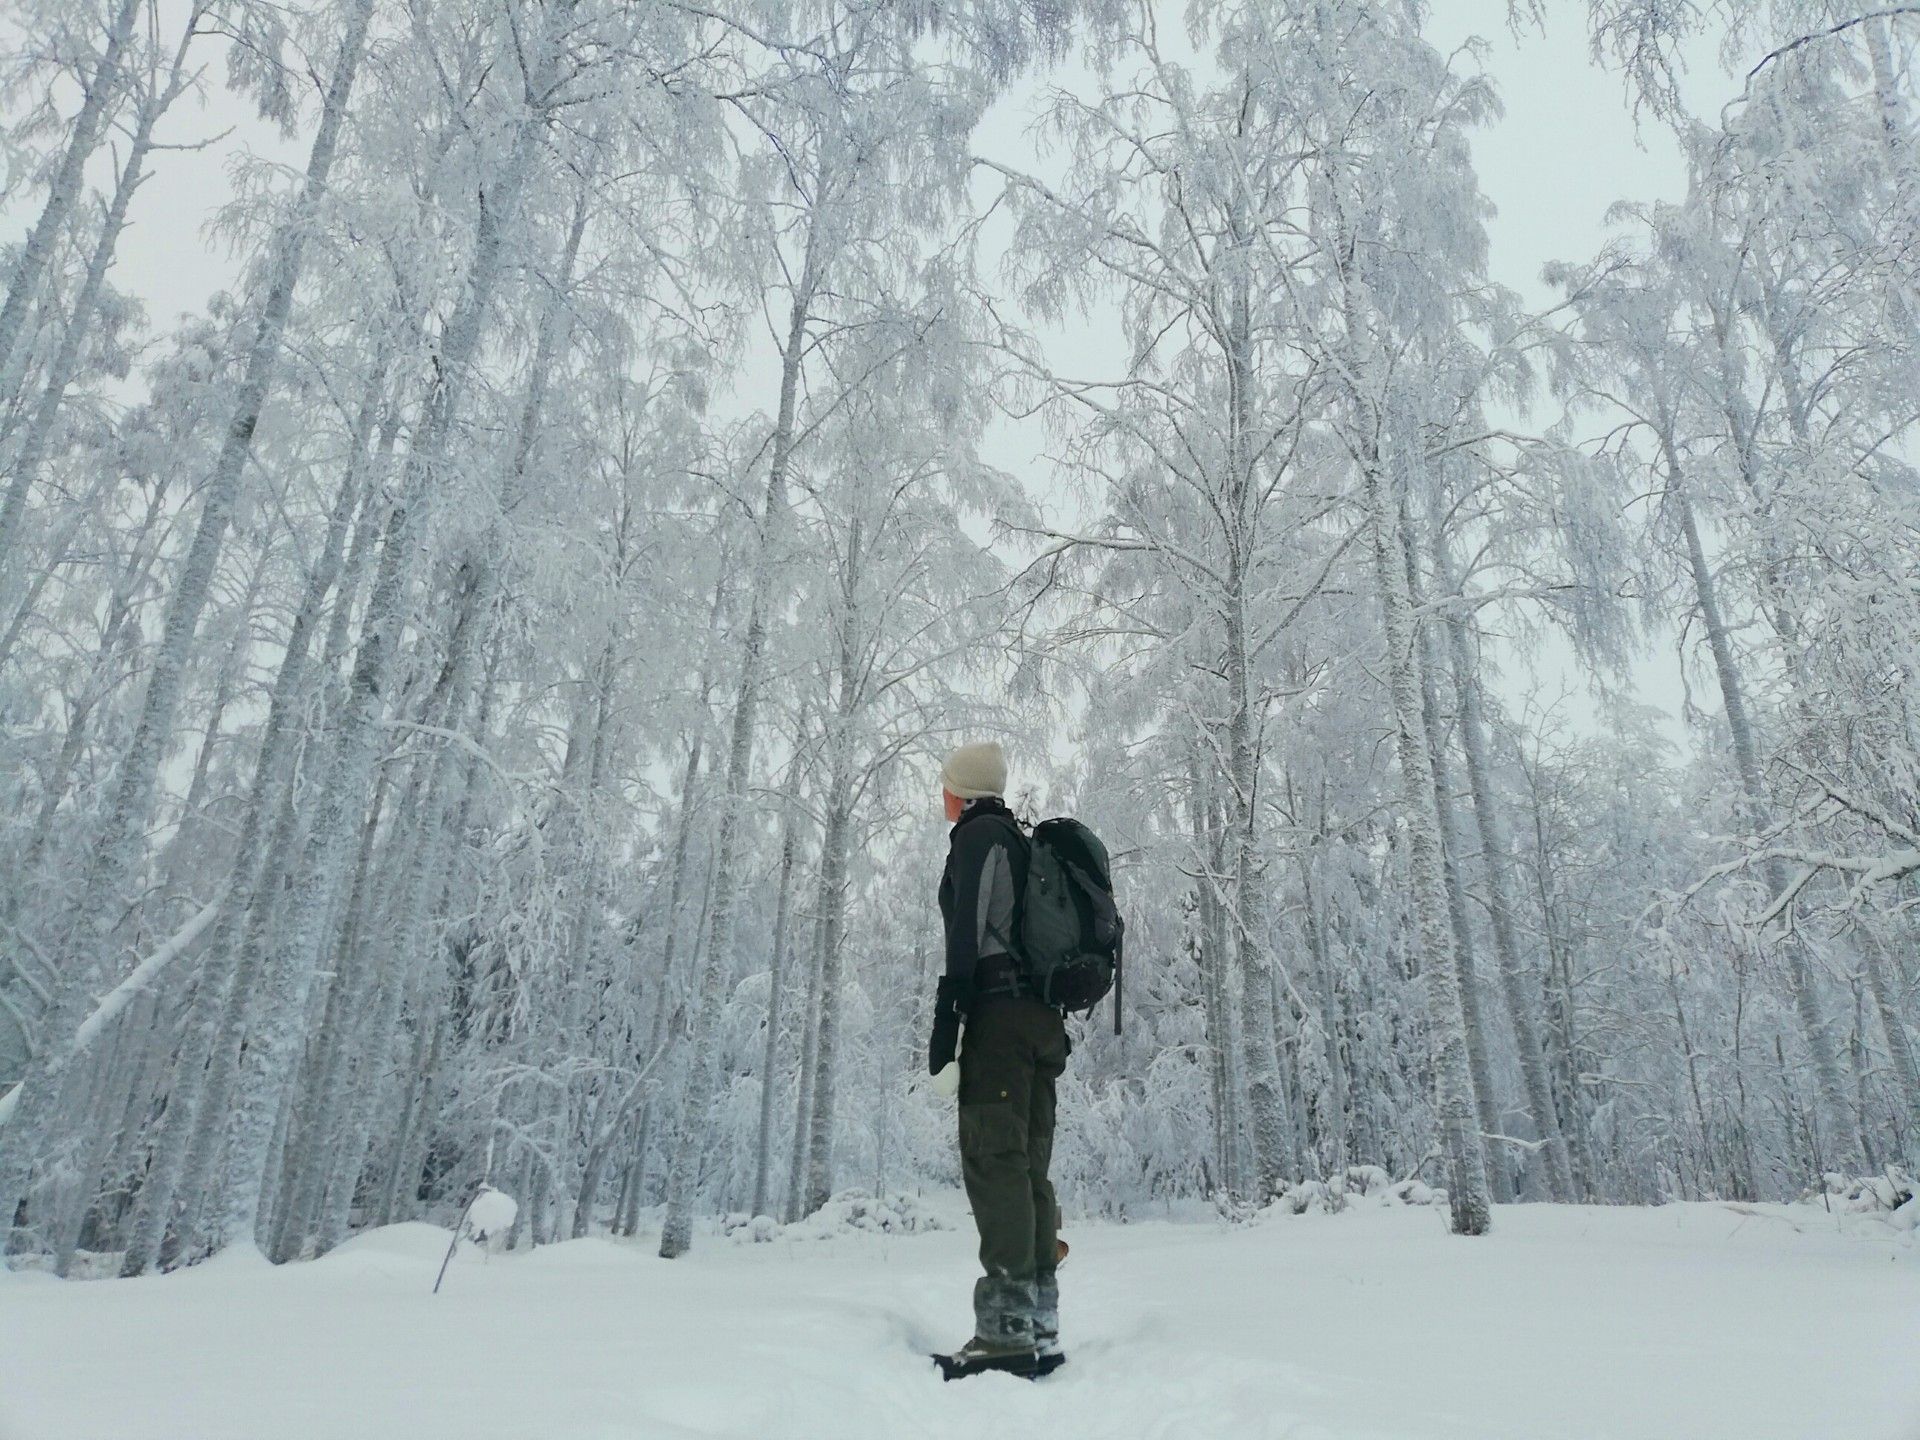 A snowy forest in Finland. A hiker stands in the centre.